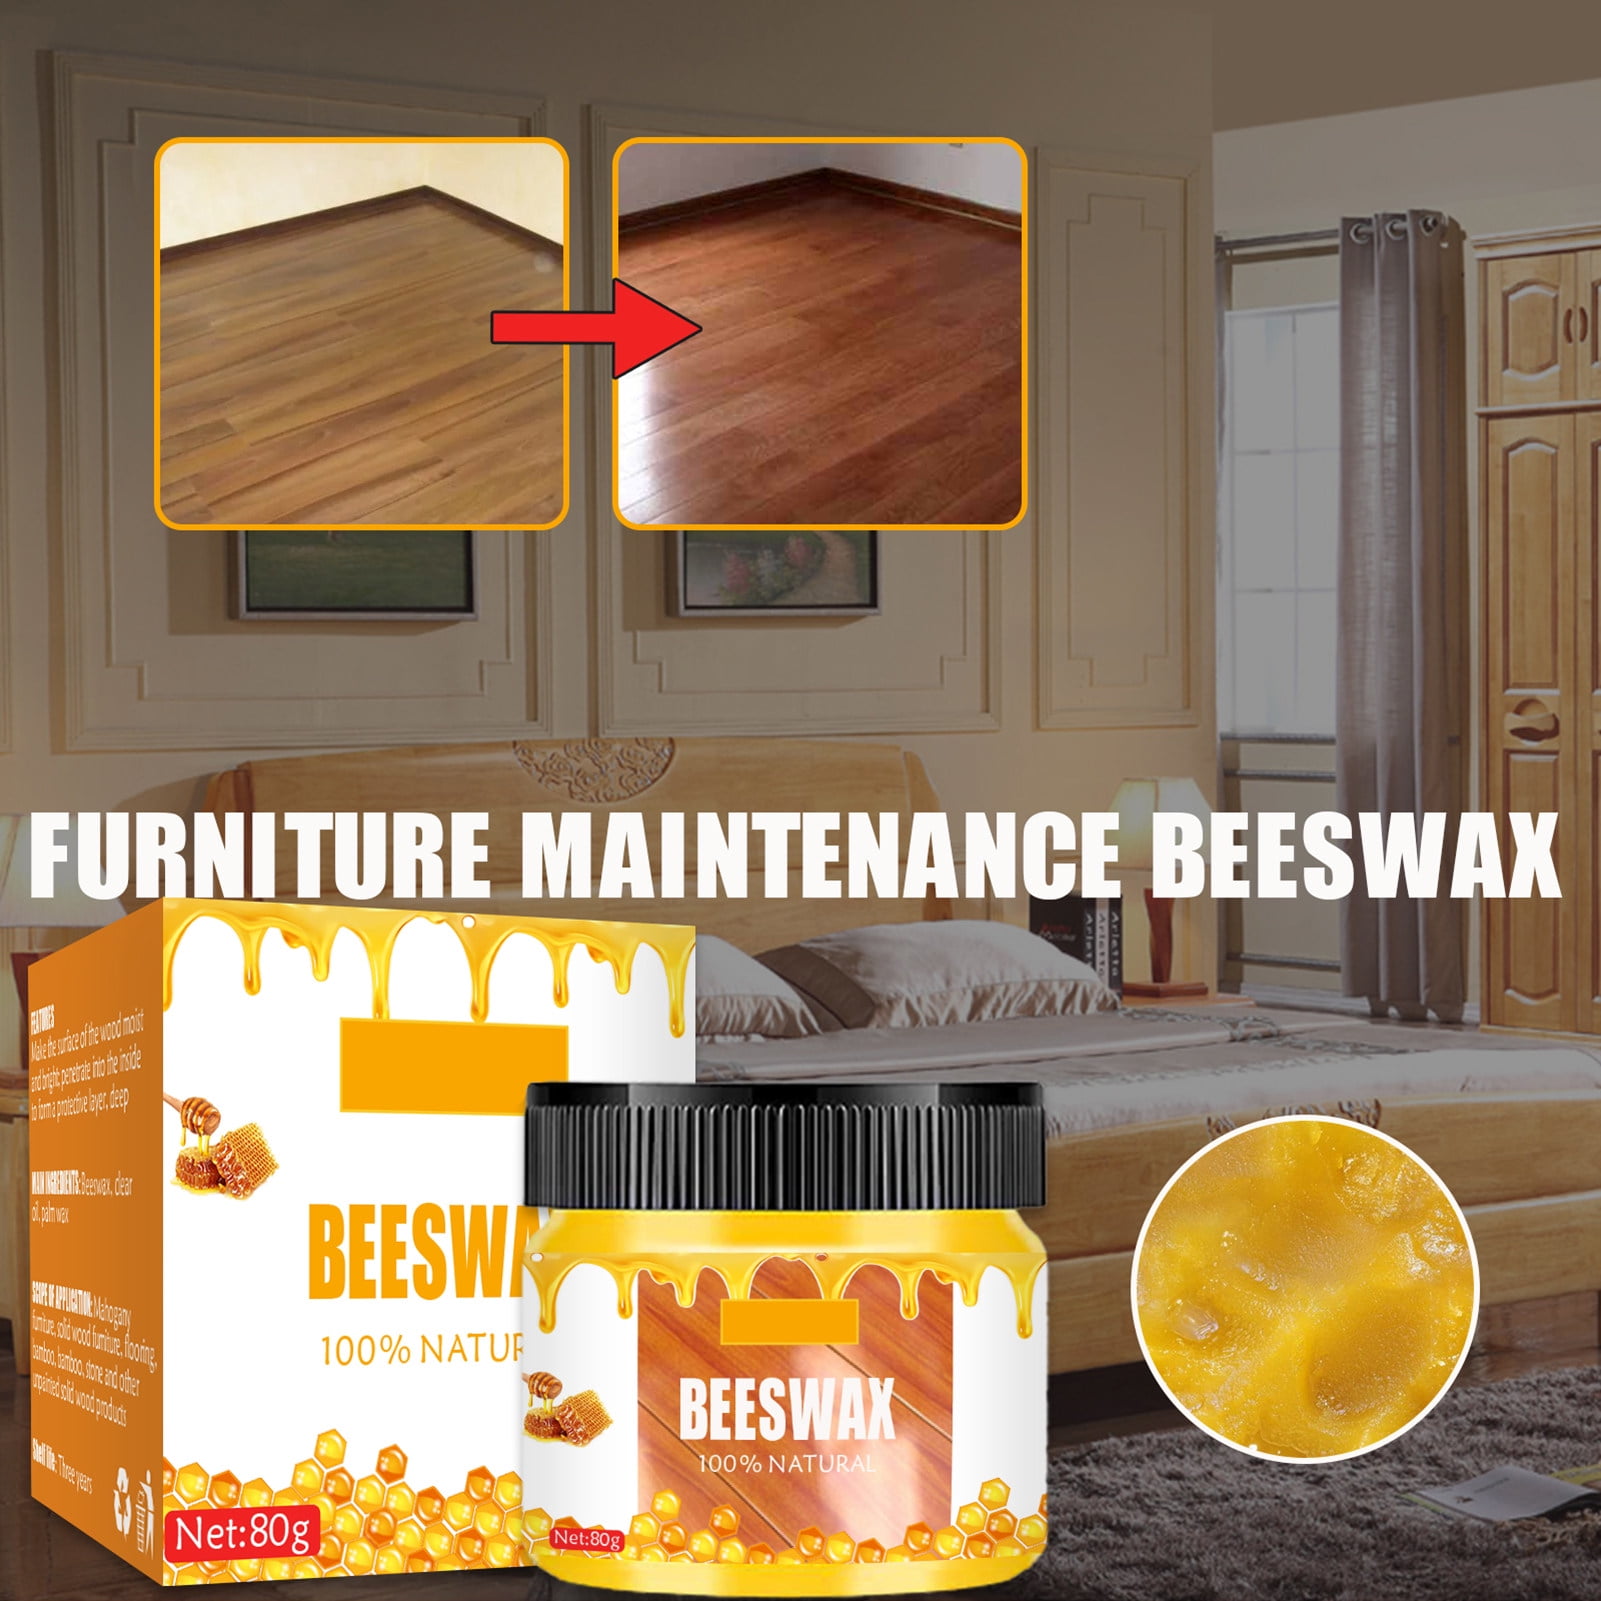 Naturally fragrant white beeswax 2 bars for £2.00 furniture and wood restoration 